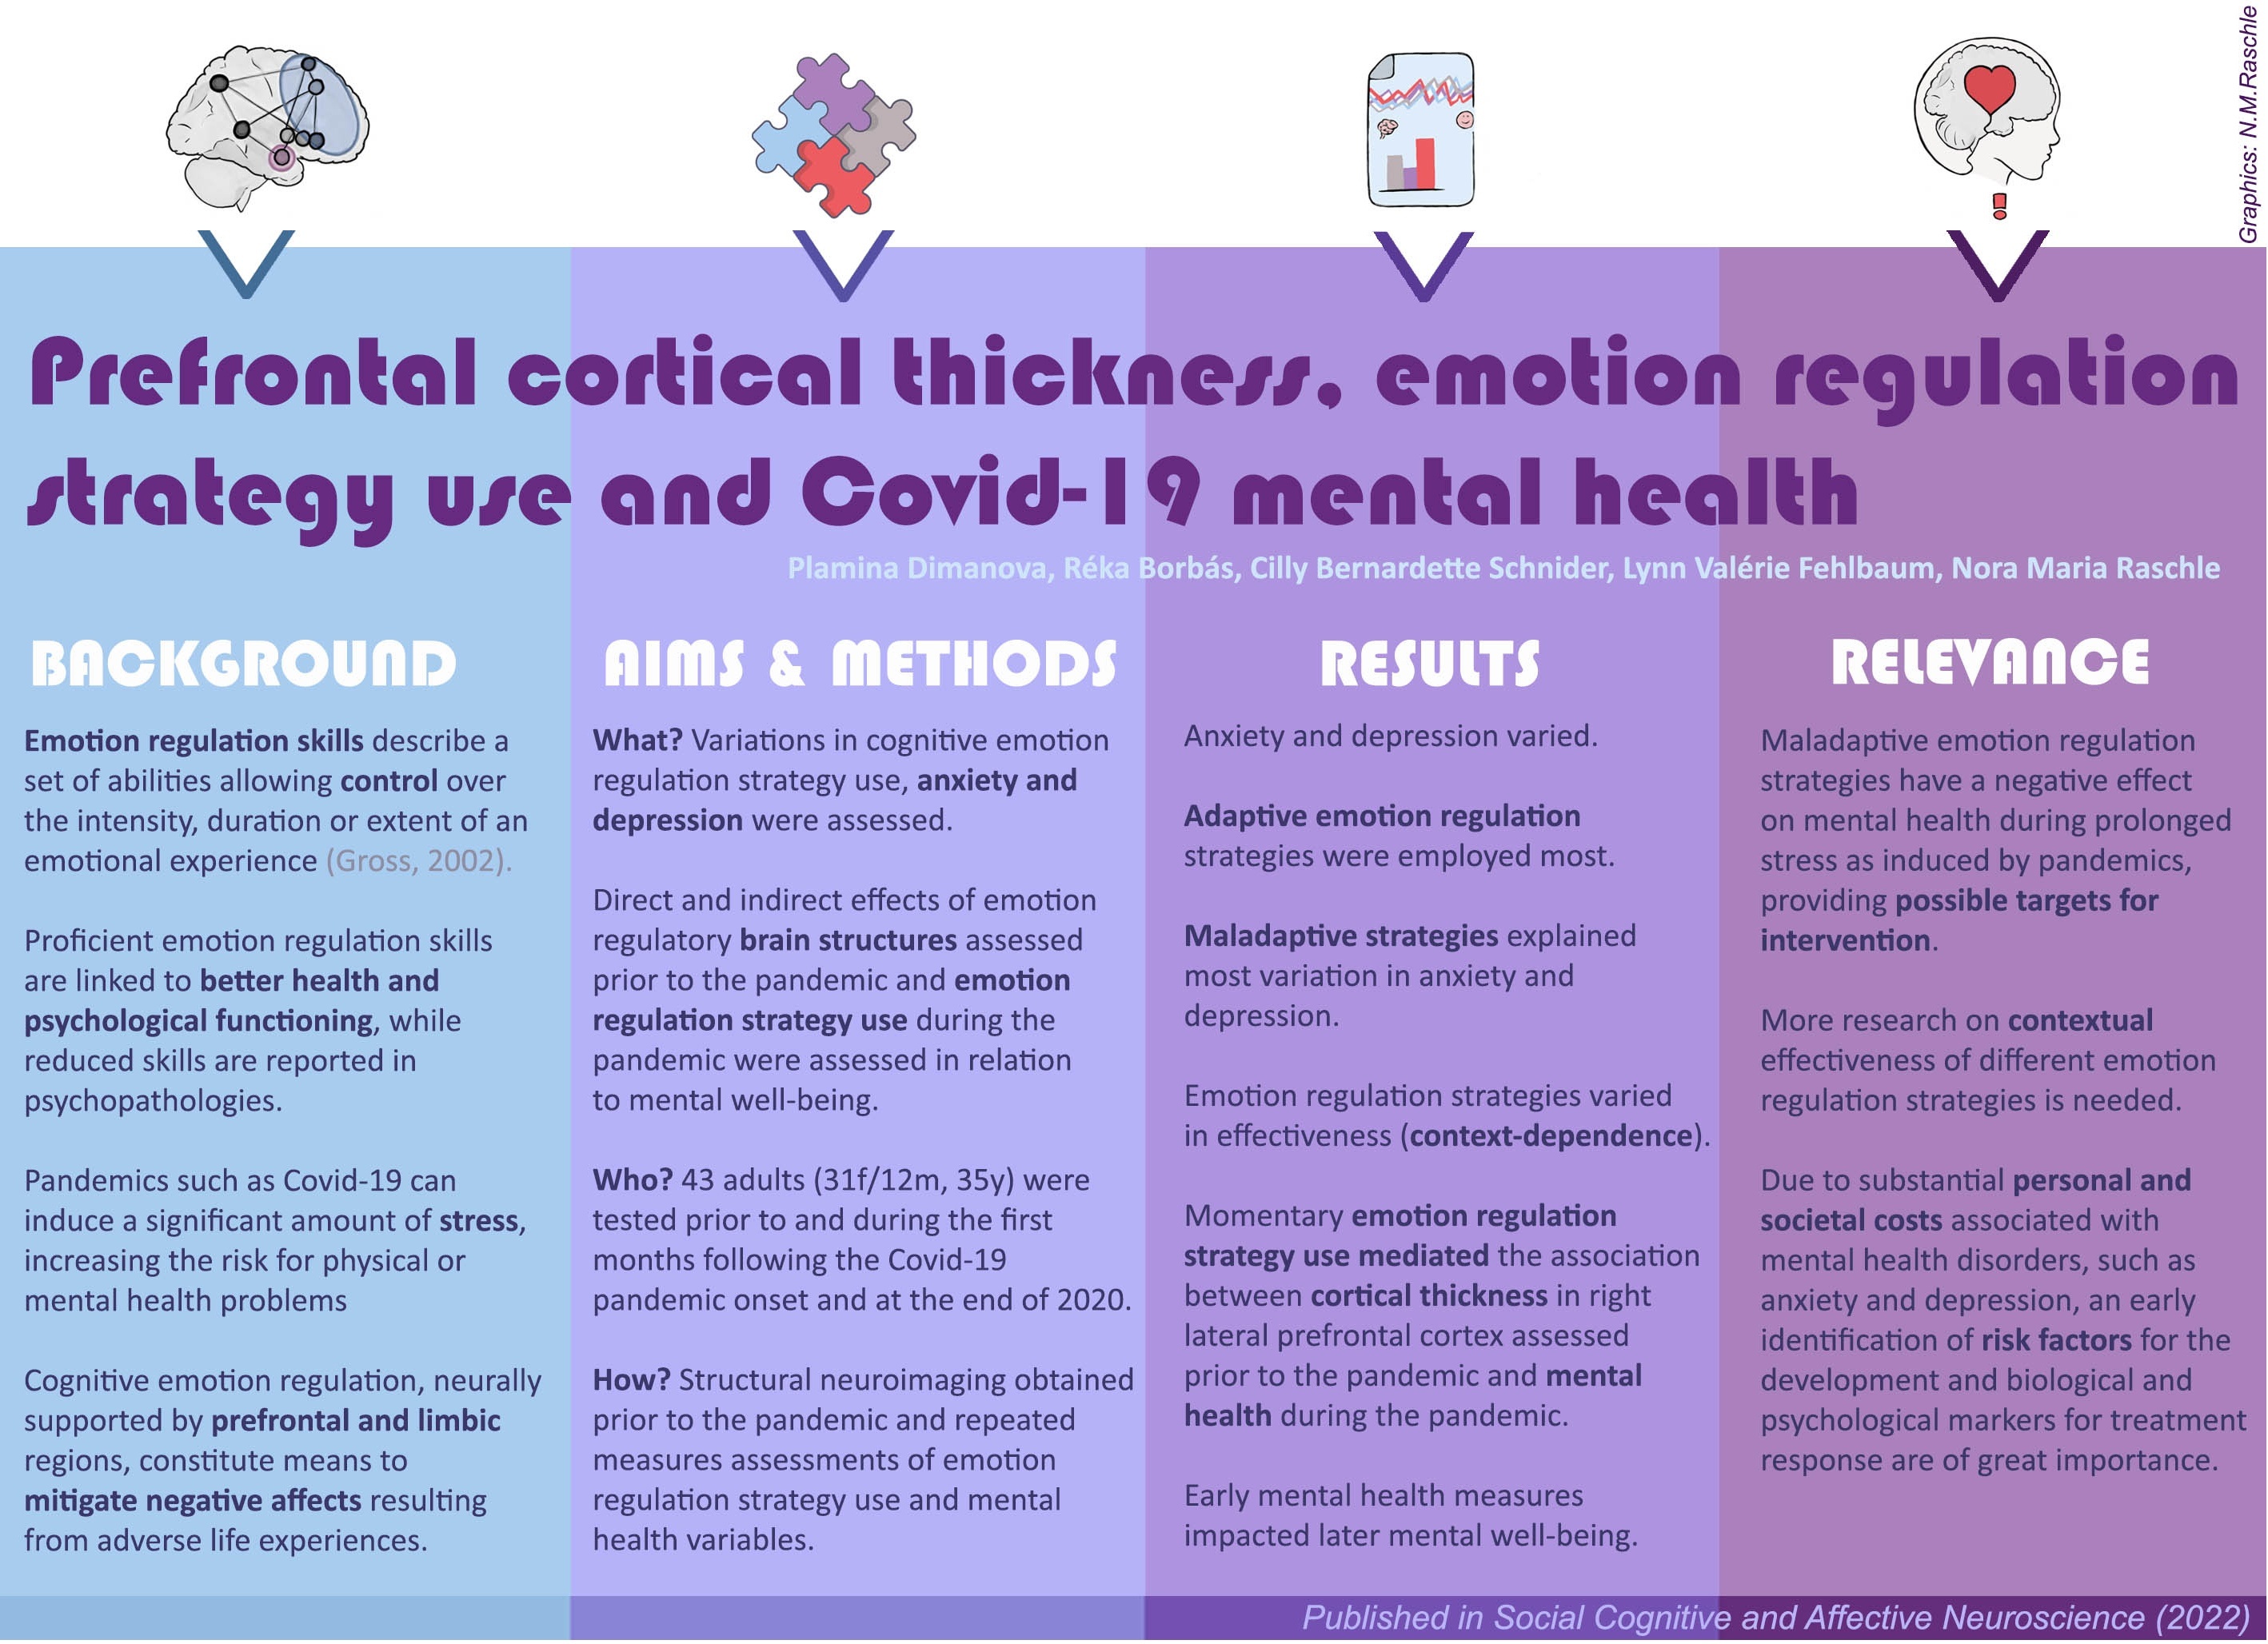 Prefrontal-cortical-thickness-emotion-regulation-Covid-19-mental-health